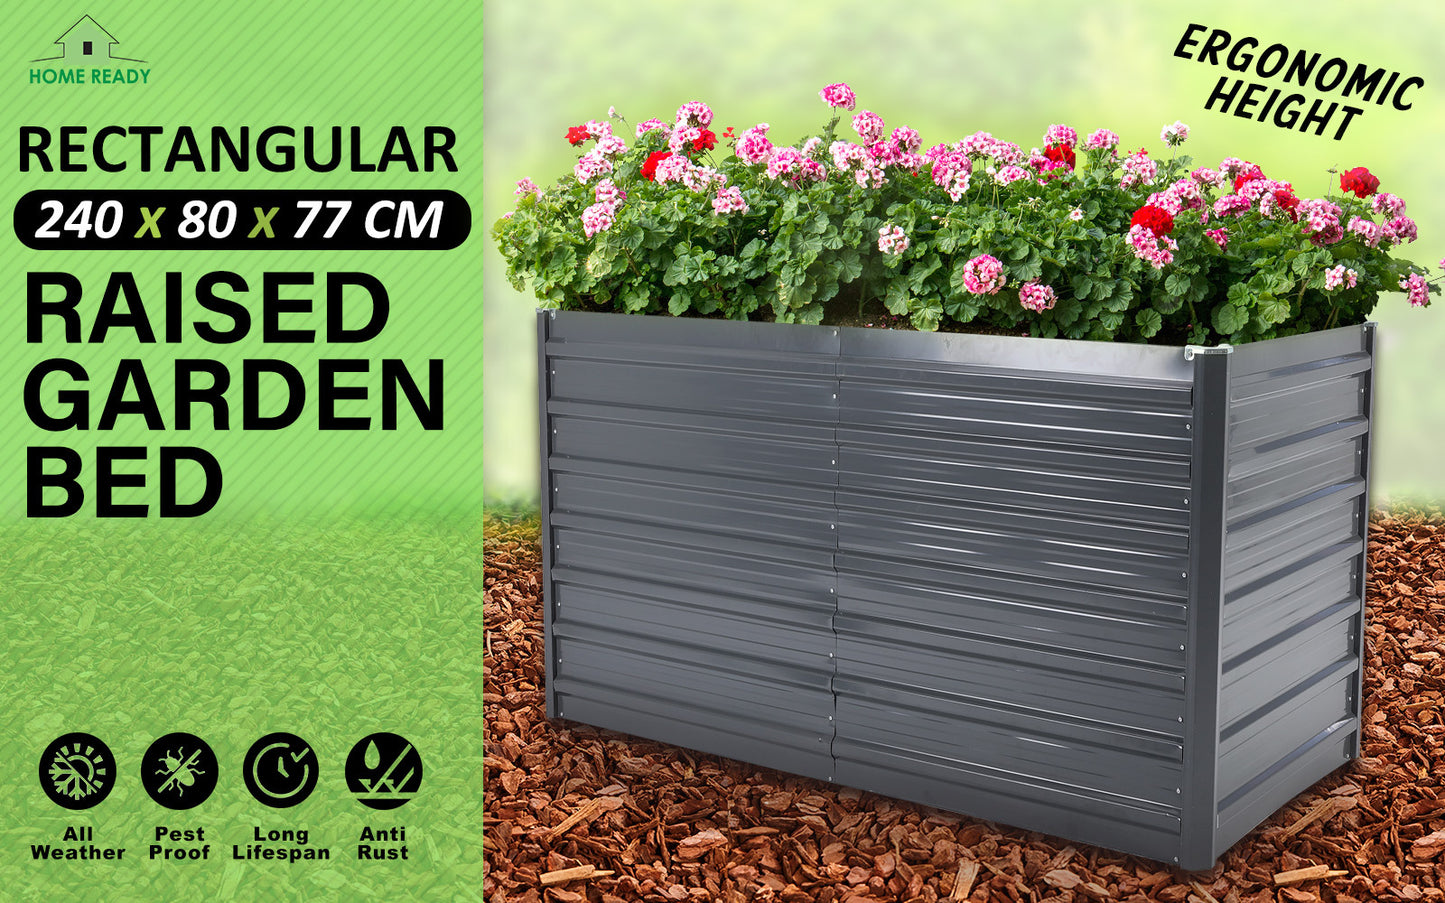 Home Ready 240 x 80 x 77cm Grey 2-in-1 Raised Garden Bed Galvanised Steel Planter - image2